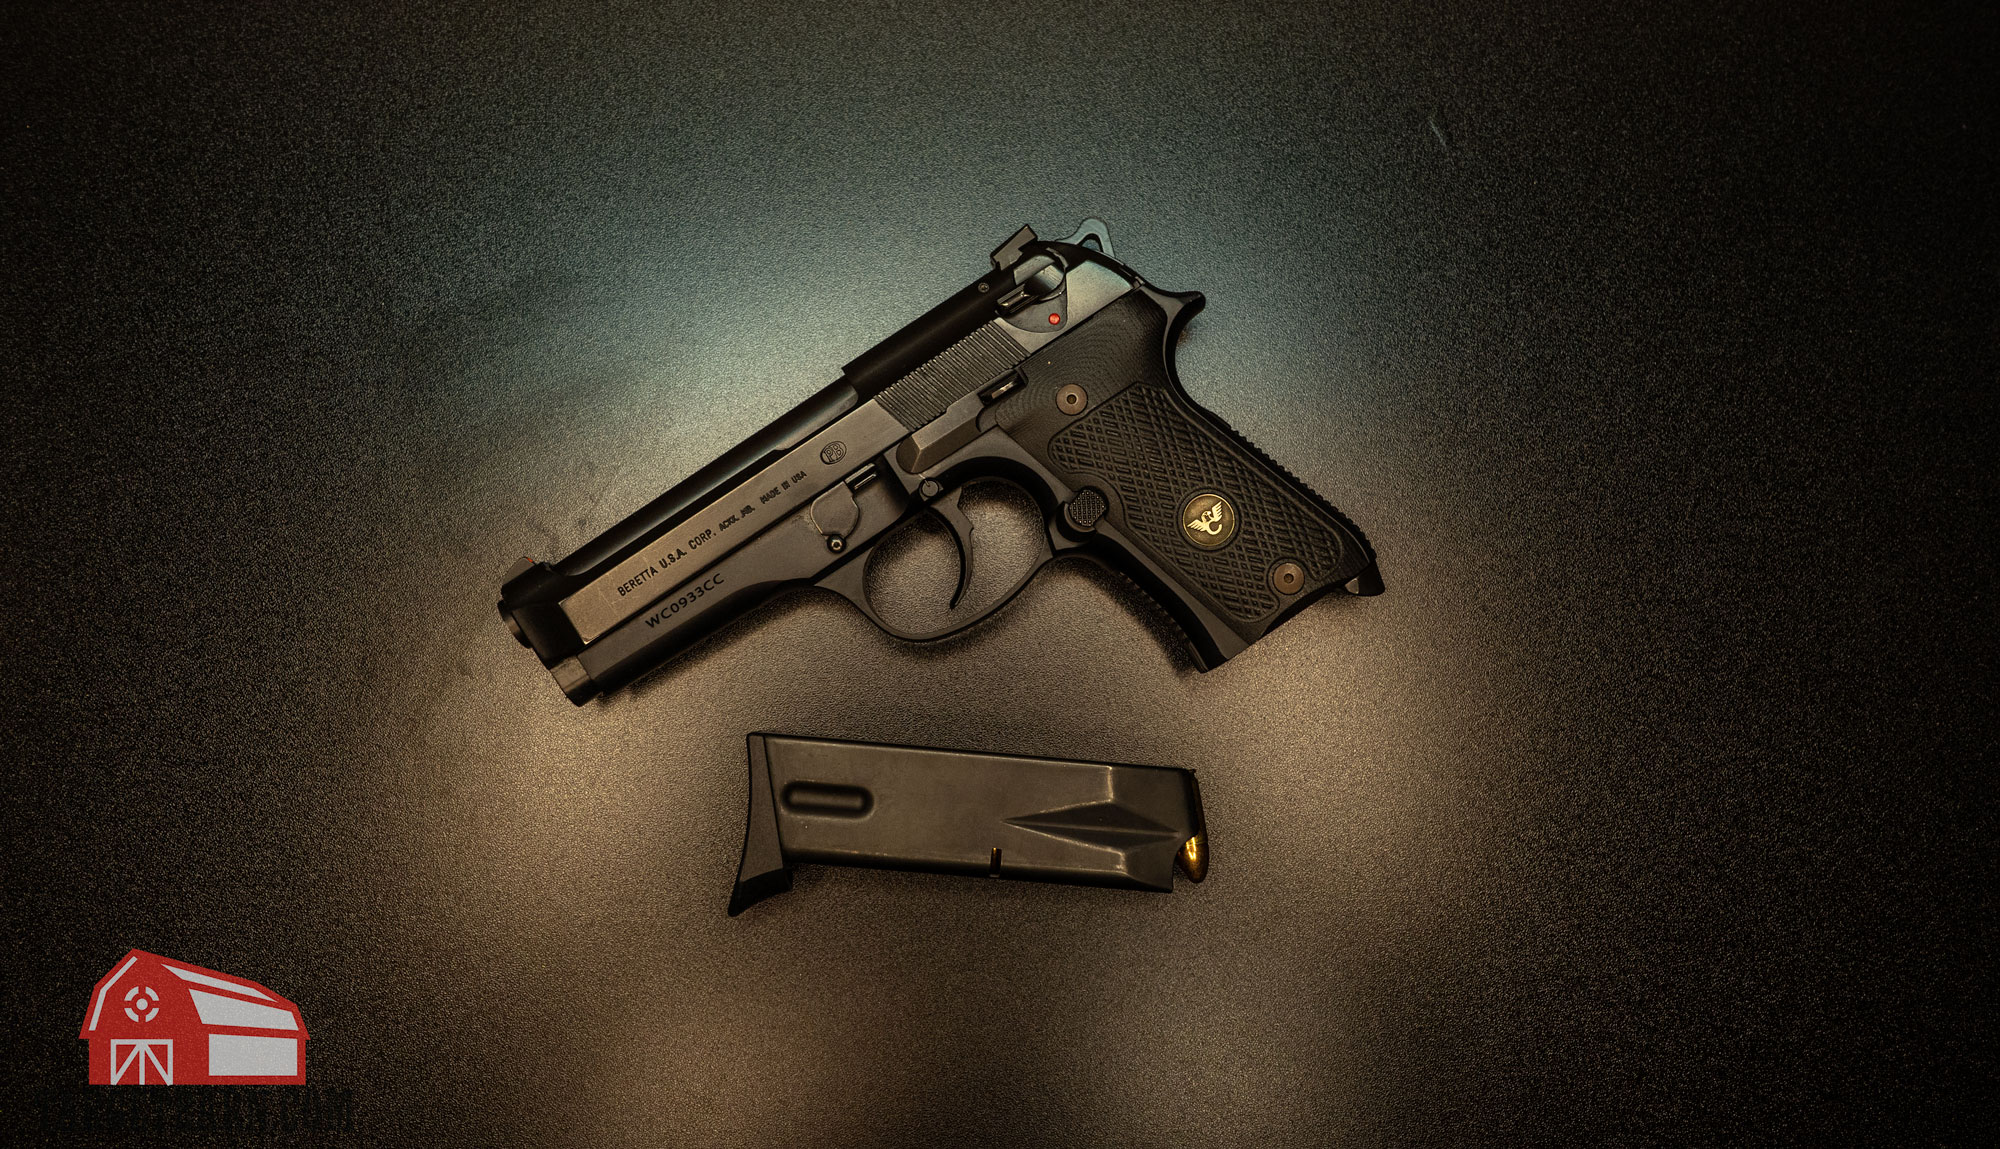 a beretta pistol with a magazine loaded with ball ammo